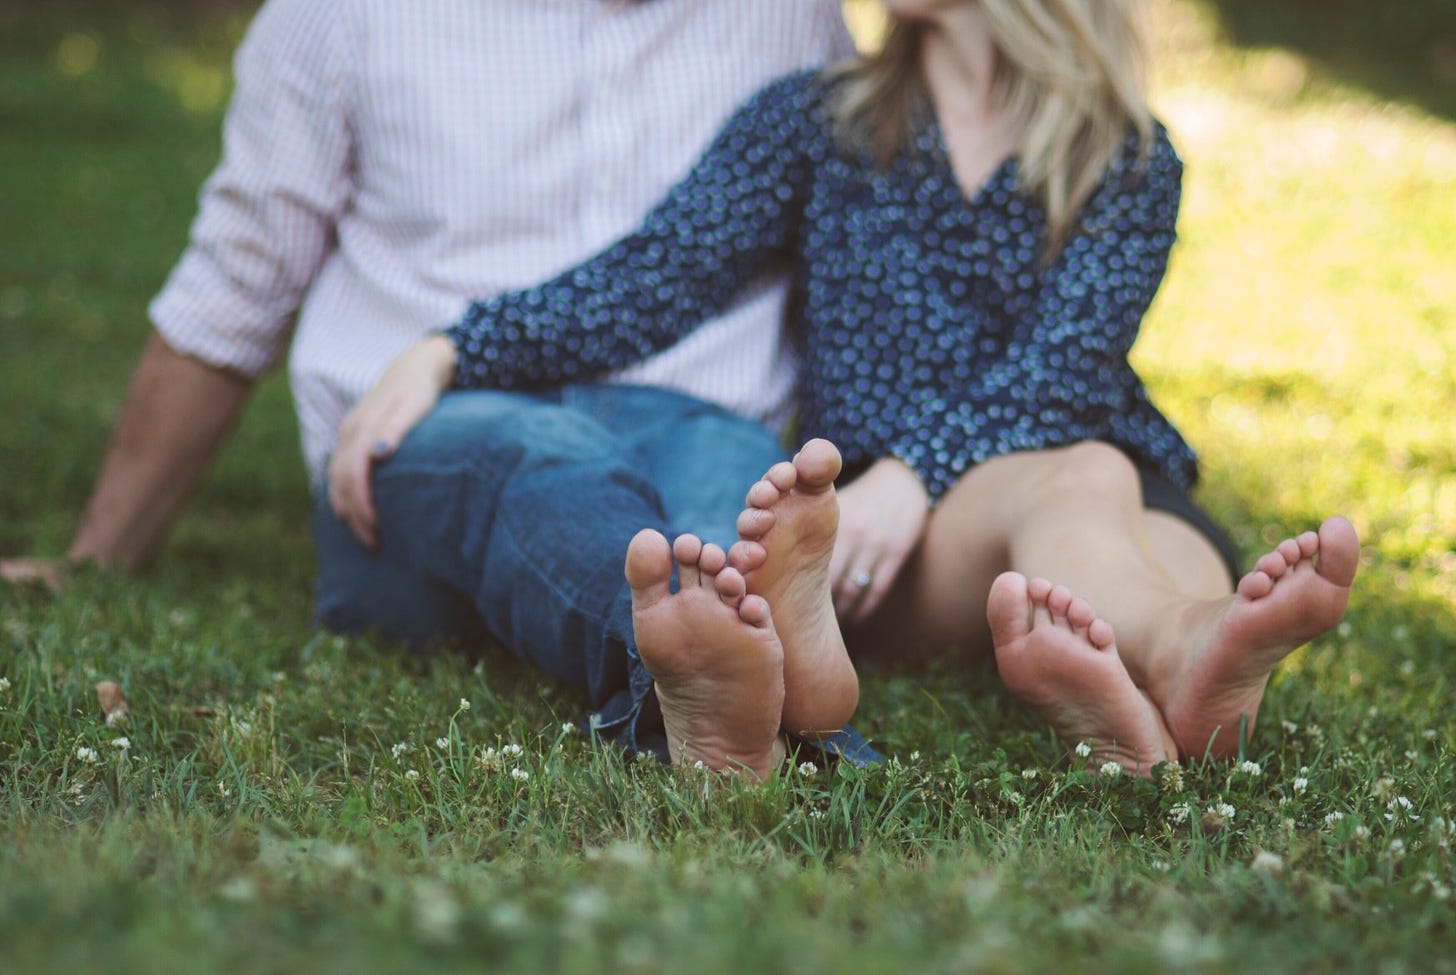 A couple sits barefoot in a summer garden.